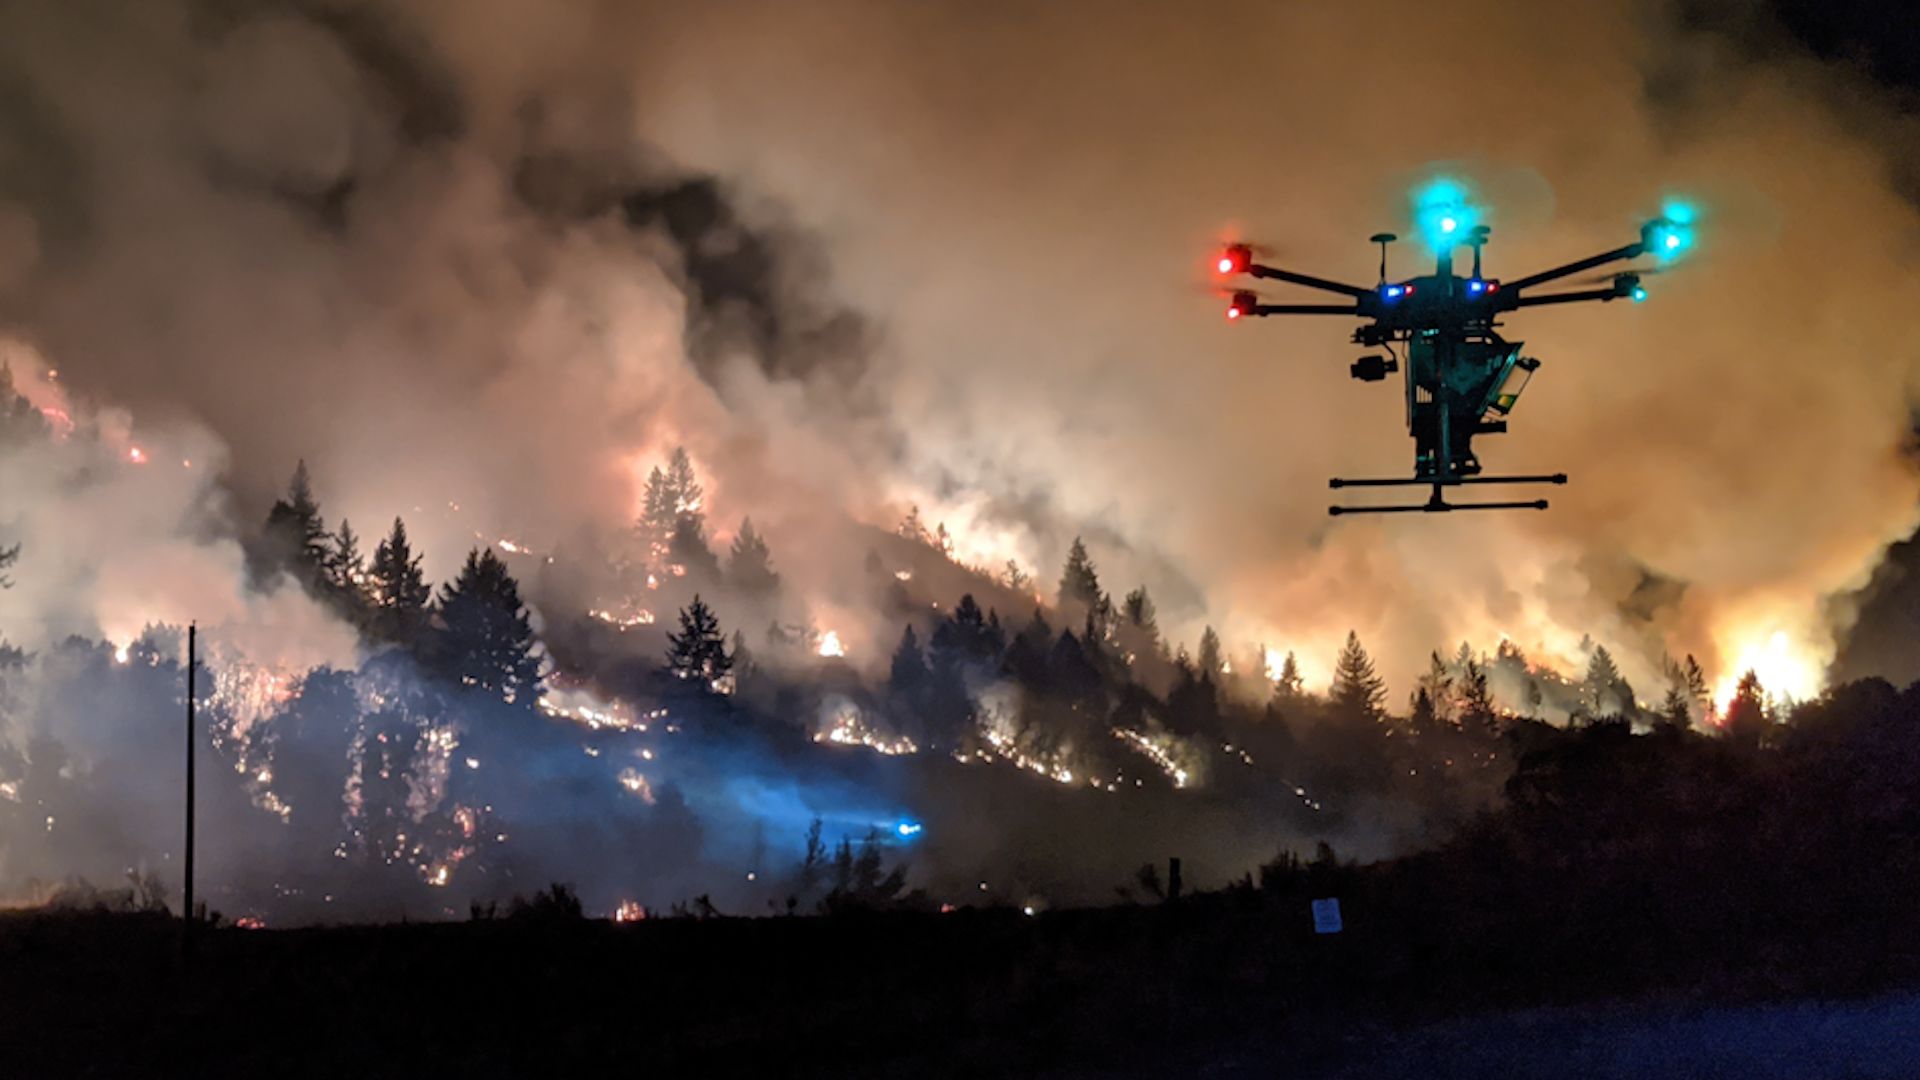 hjul nominelt Smitsom sygdom These fireball-dropping drones are on the frontlines of wildfire prevention  | CNN Business